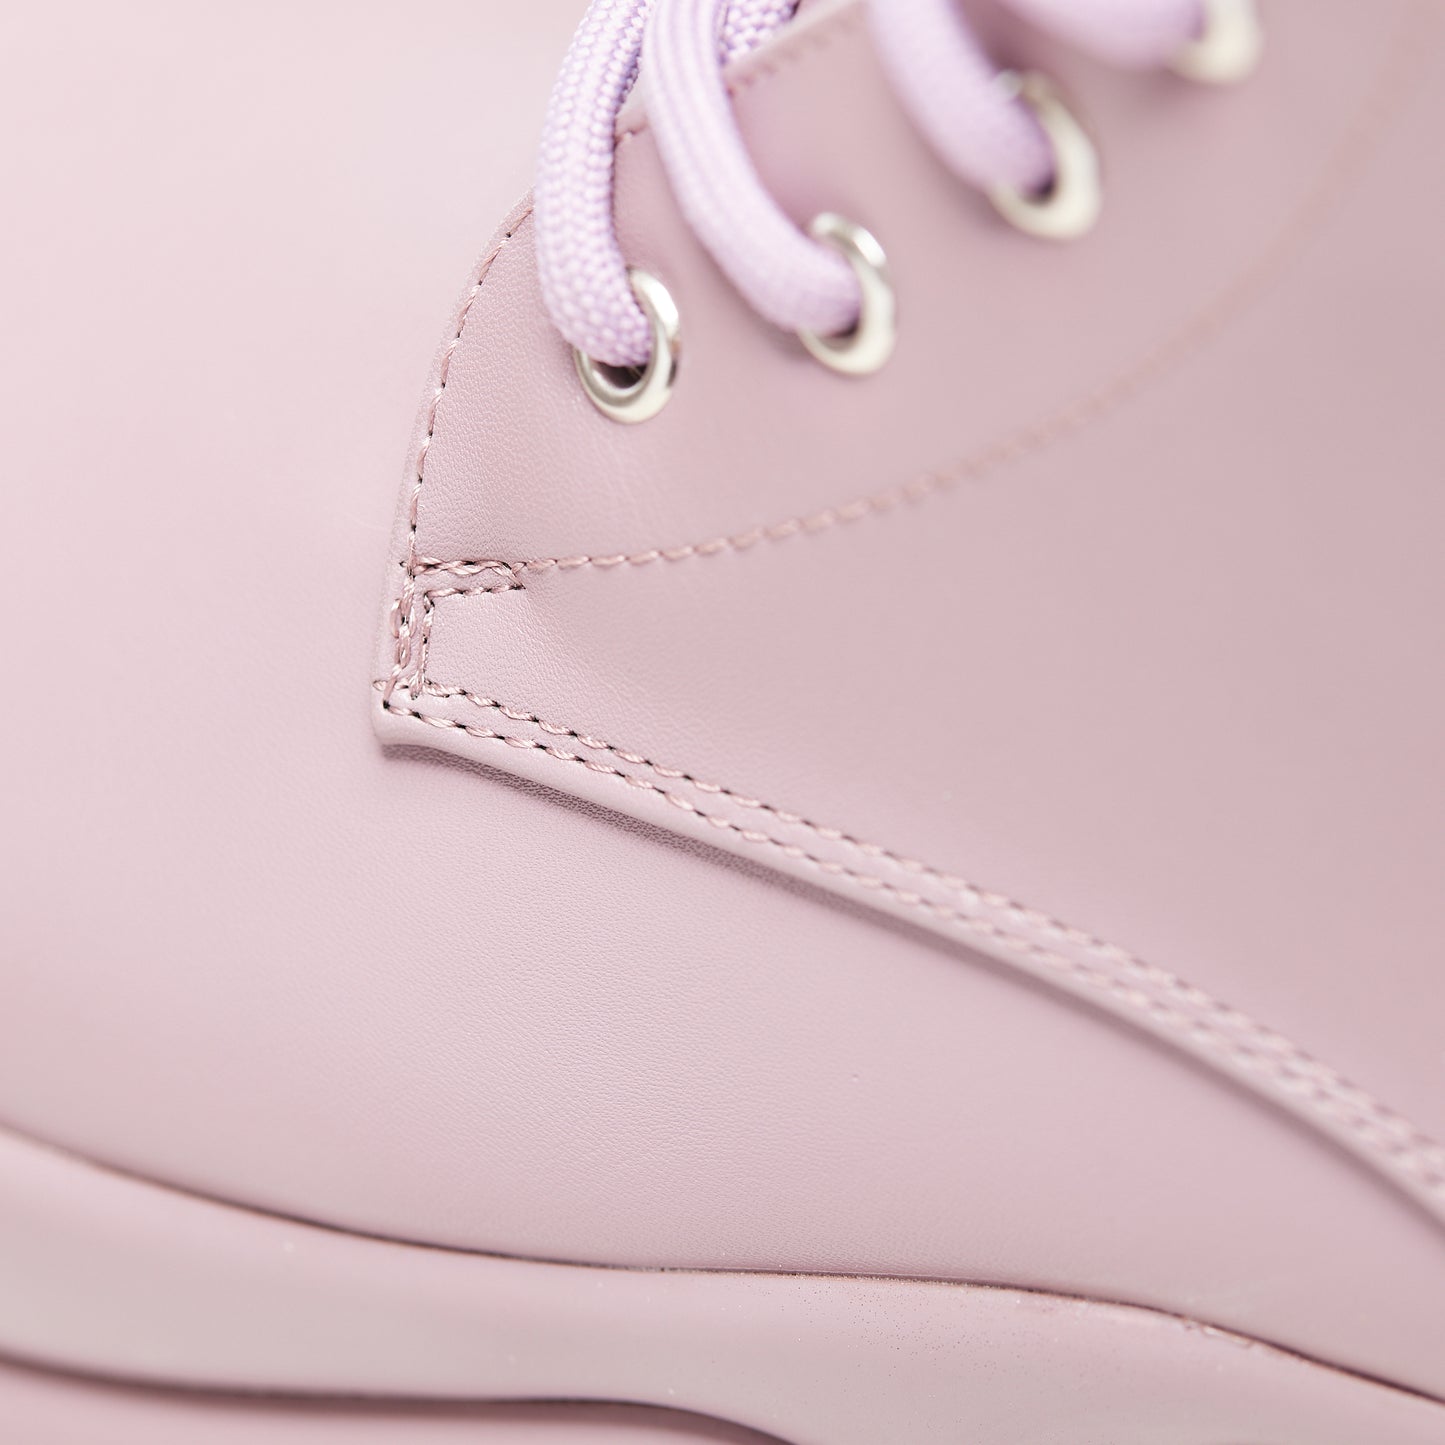 Costal Cruiser Vilun Ankle Boots - Mauve - Ankle Boots - KOI Footwear - Purple - Material Detail